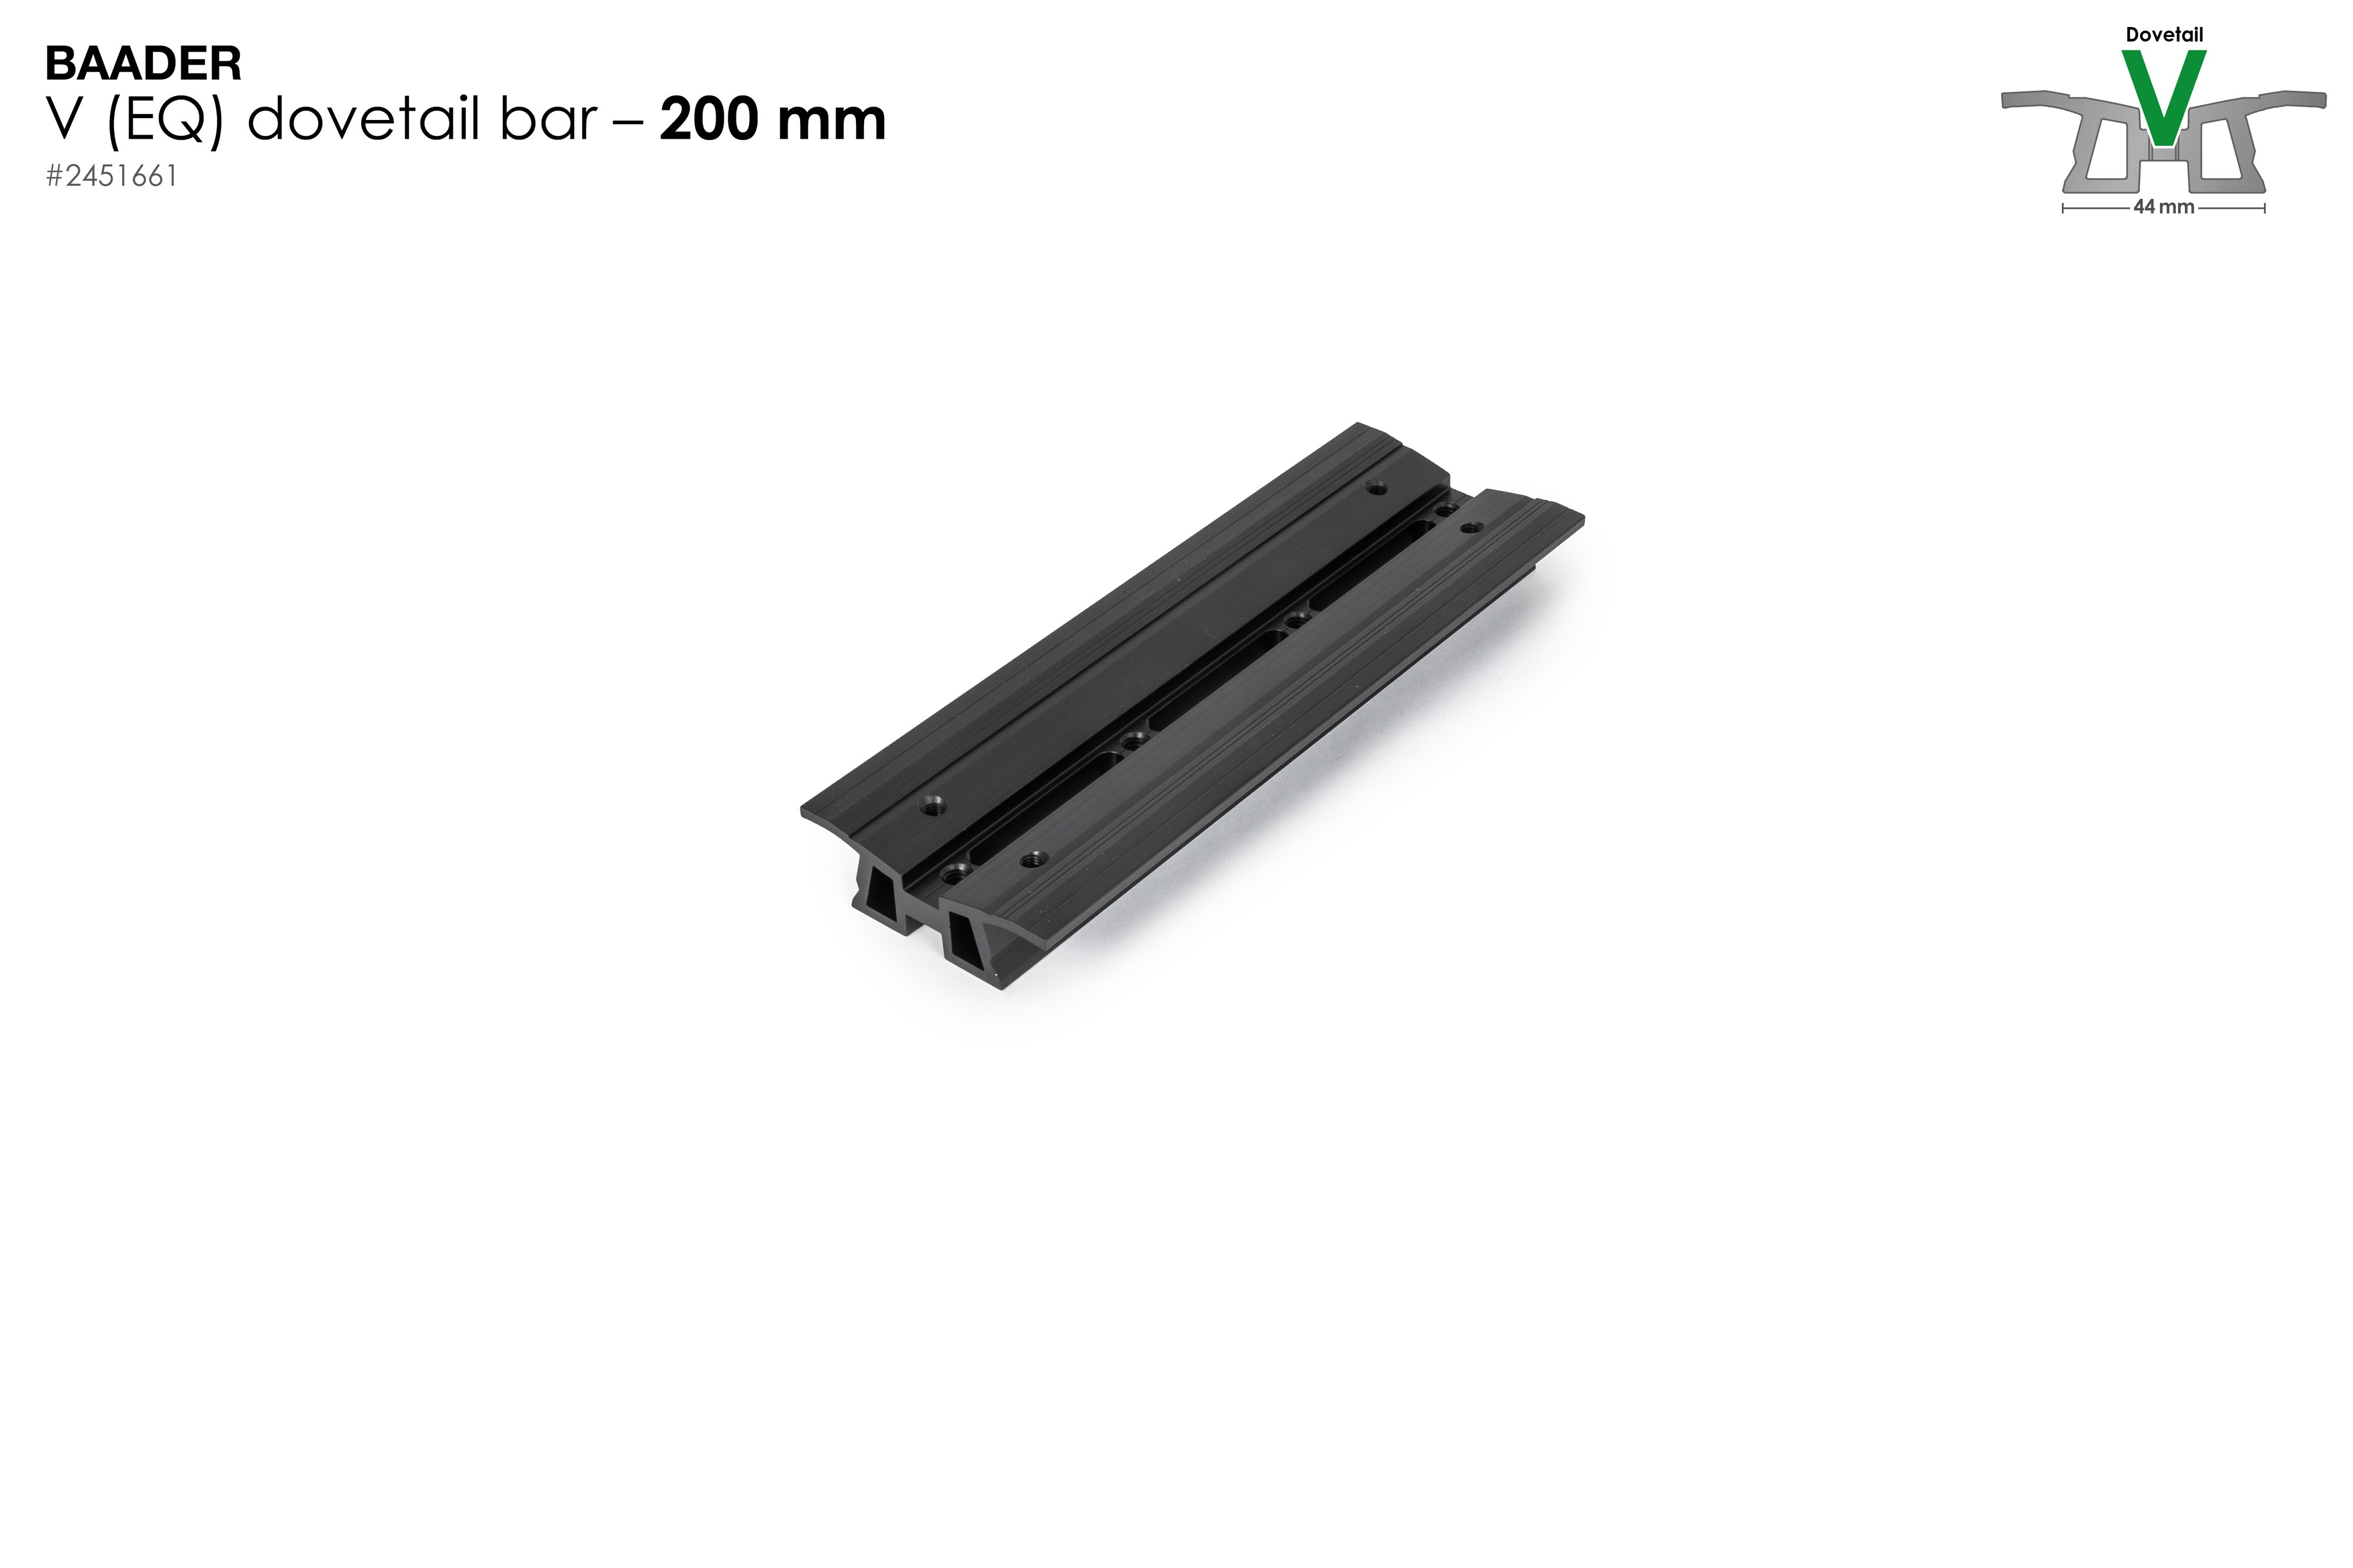 Baader V-200 dovetail, L= 200mm for Vixen, Celestron and Skywatcher Mounts